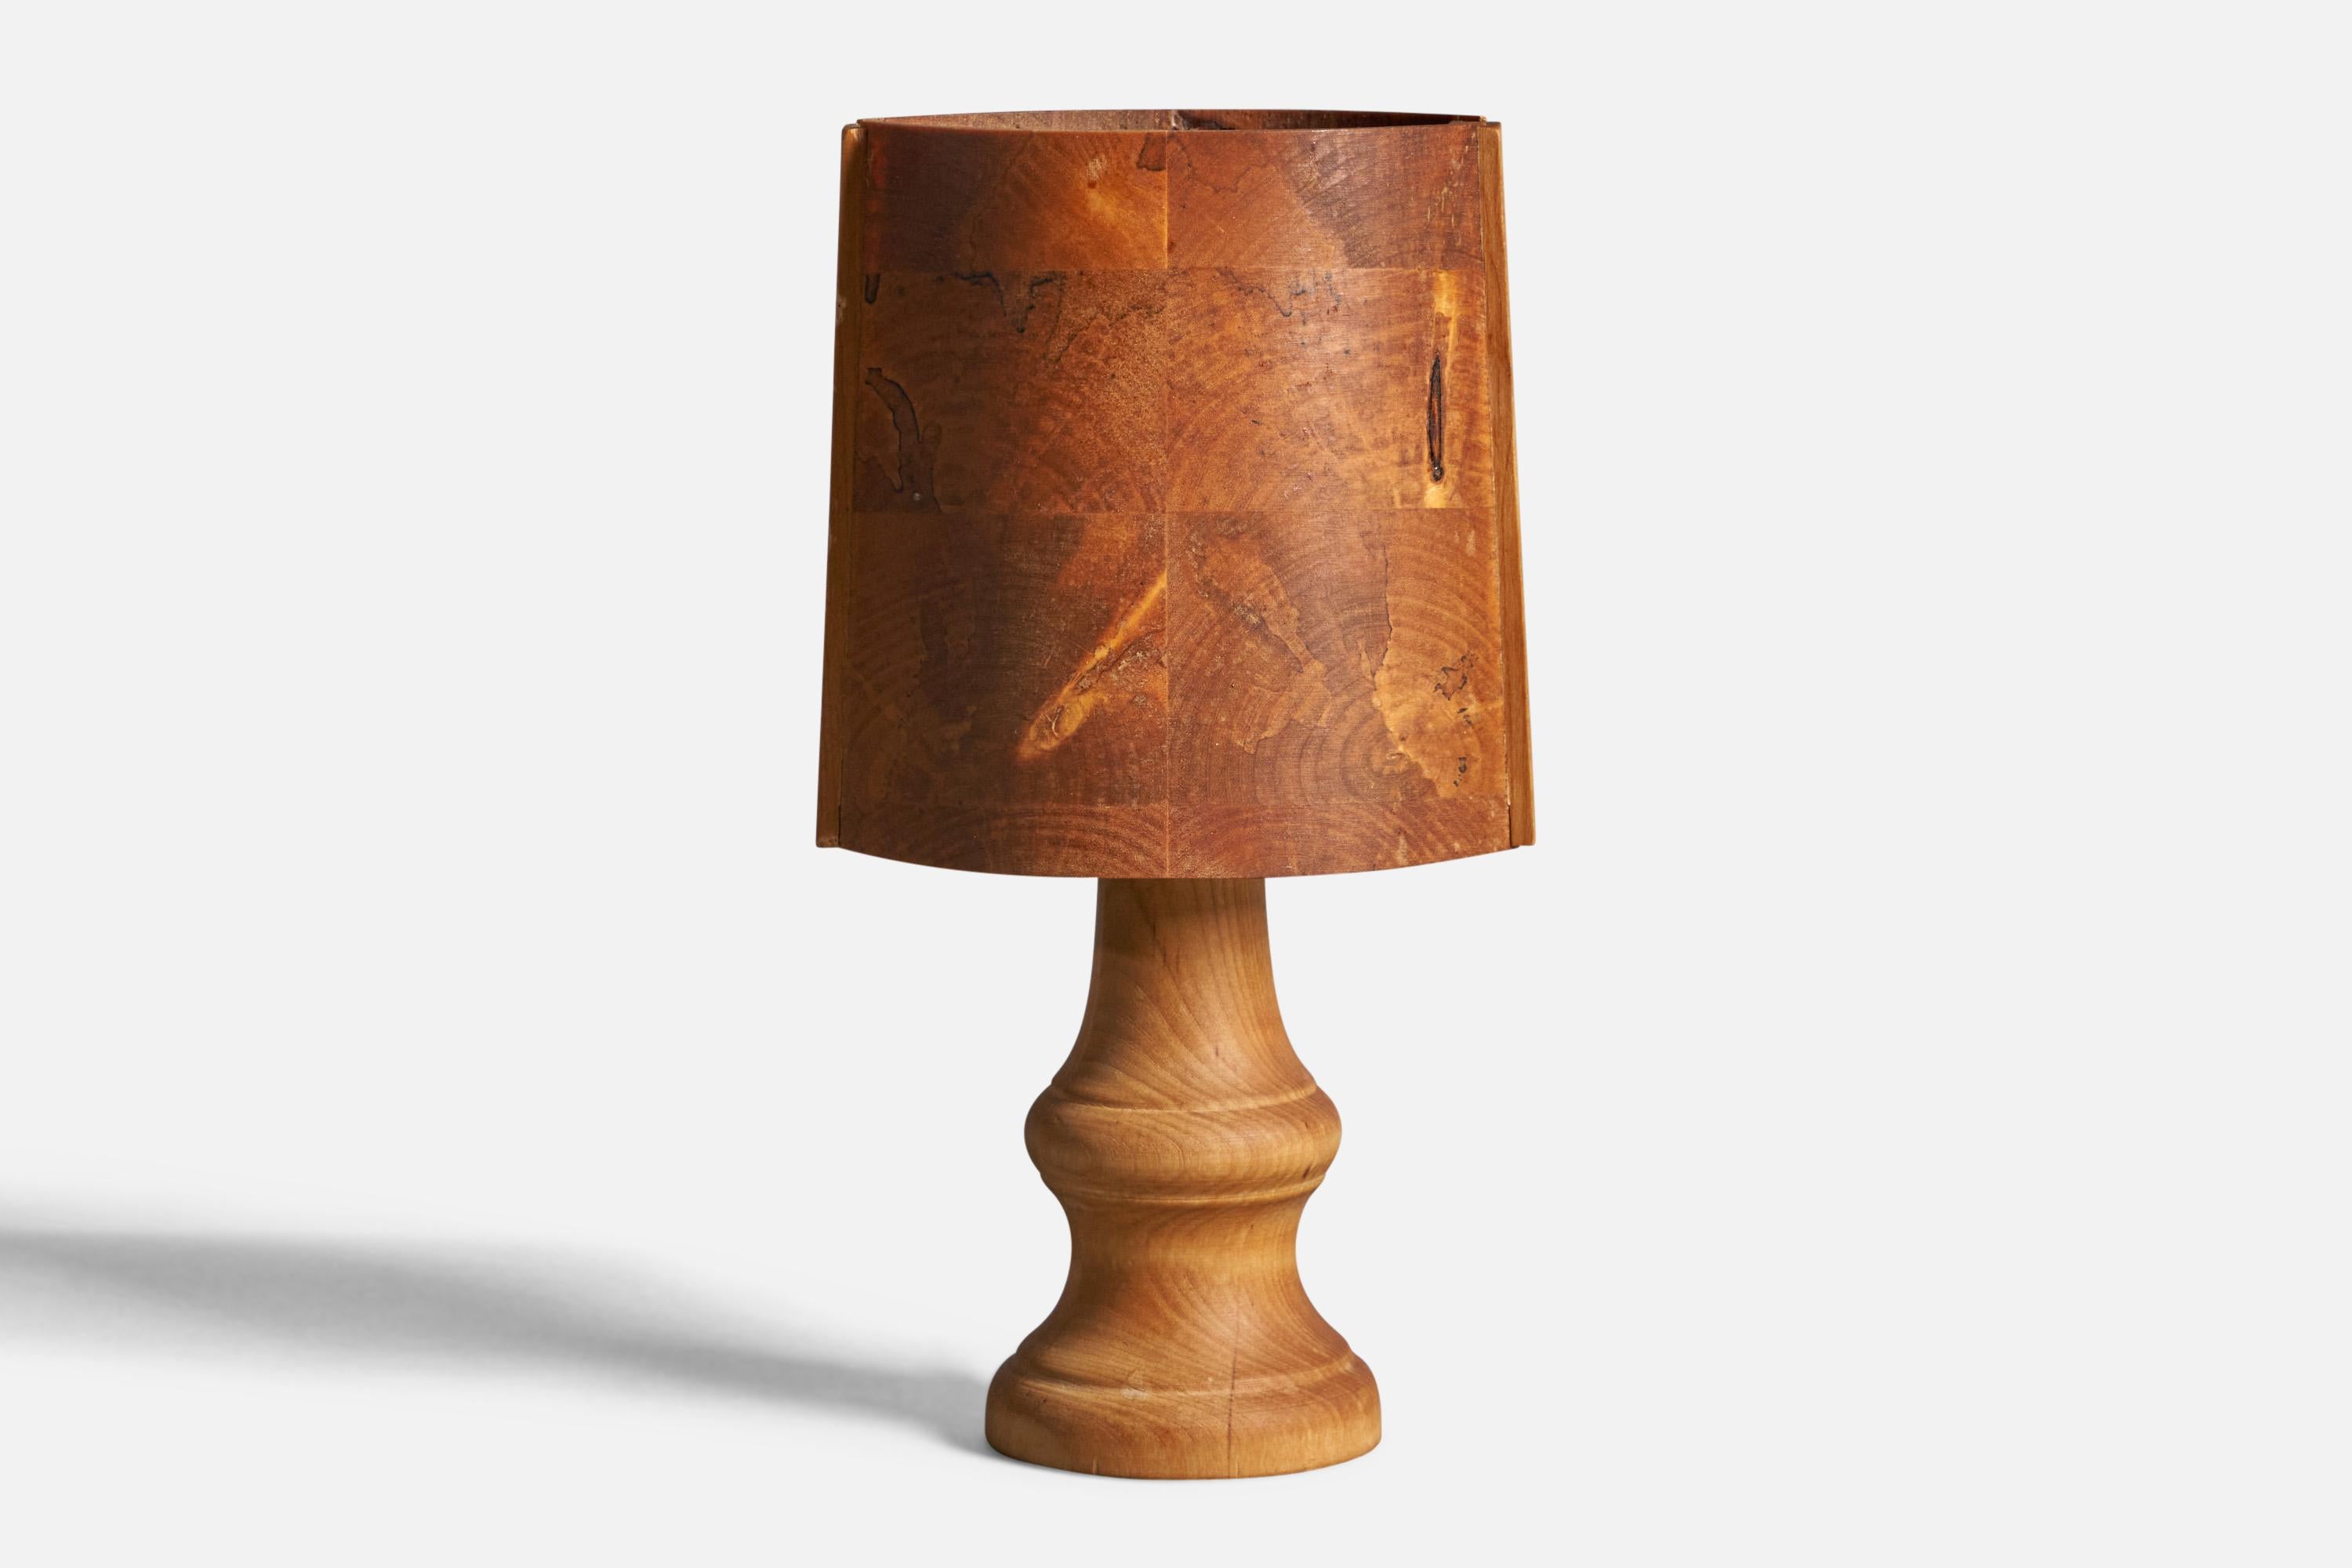 A pine table lamp designed and produced in Sweden, 1970s.

Overall Dimensions (inches): 10.9